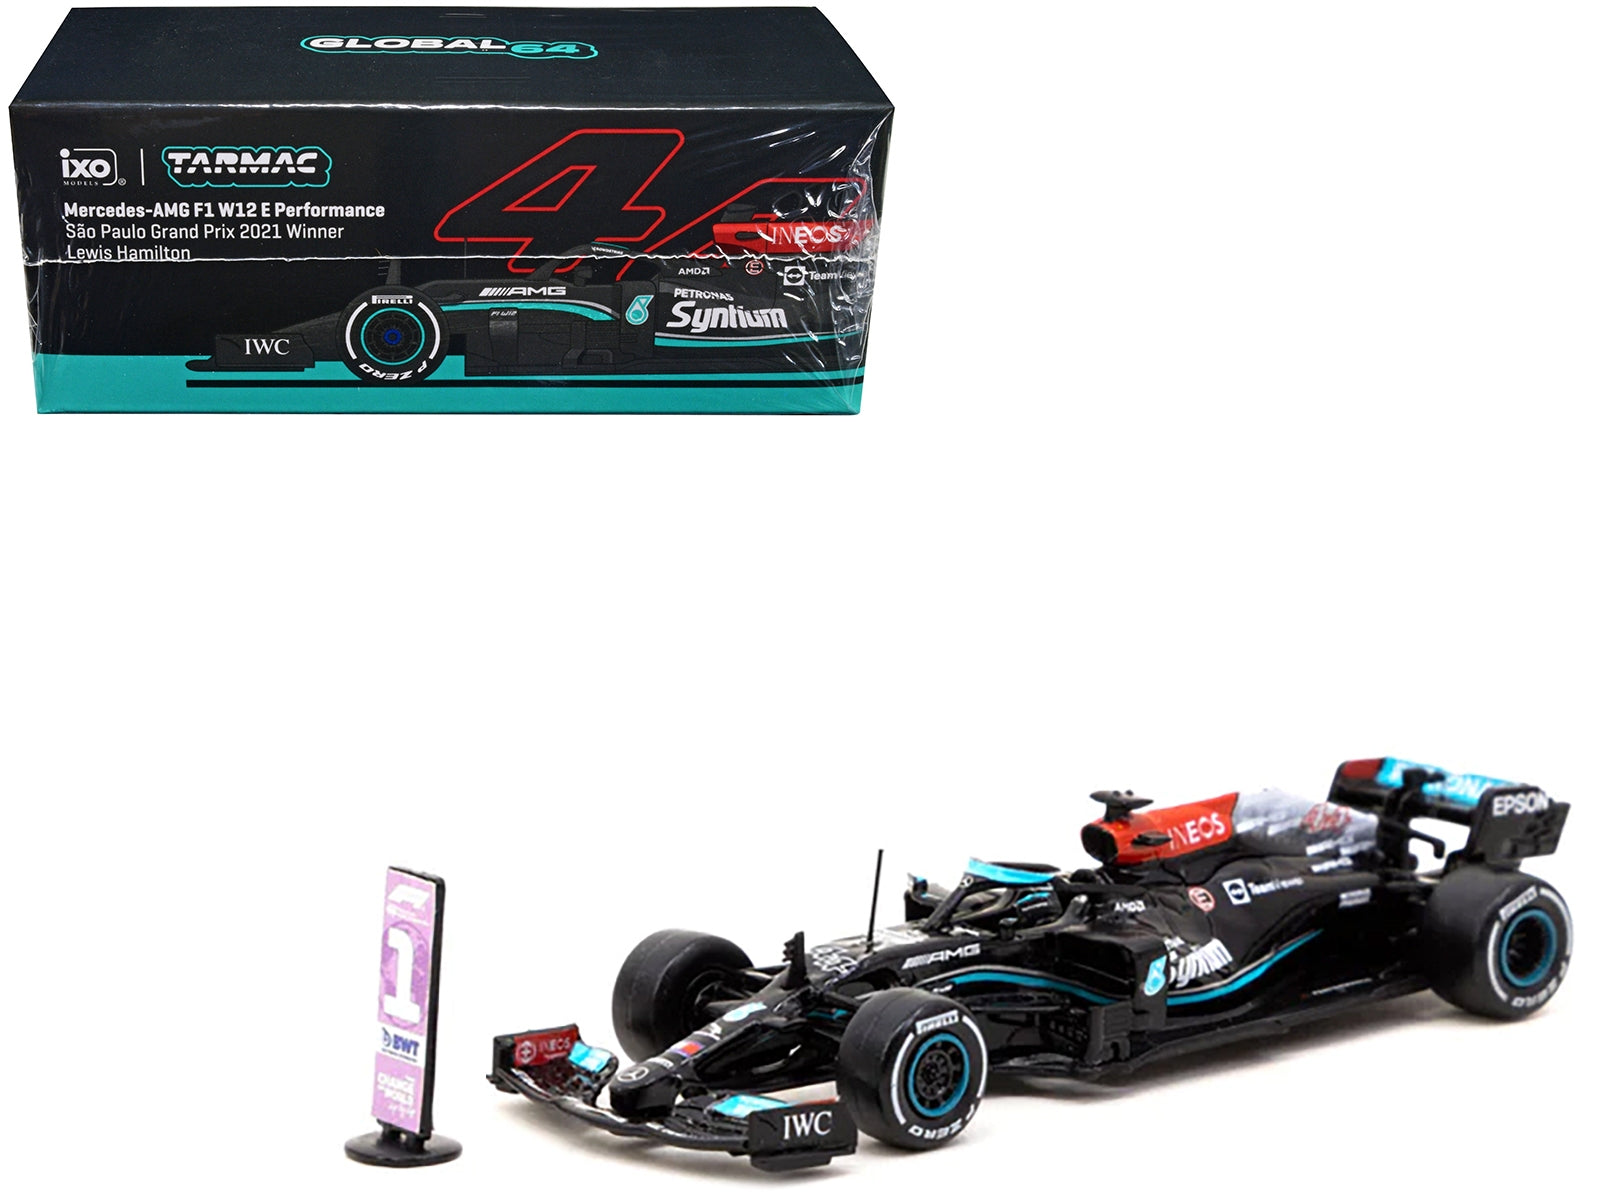 Mercedes-AMG F1 W12 E Performance #44 Lewis Hamilton Winner Formula One F1 Sao Paolo GP (2021) with Number Board "Global64" Series 1/64 Diecast Model Car by Tarmac Works